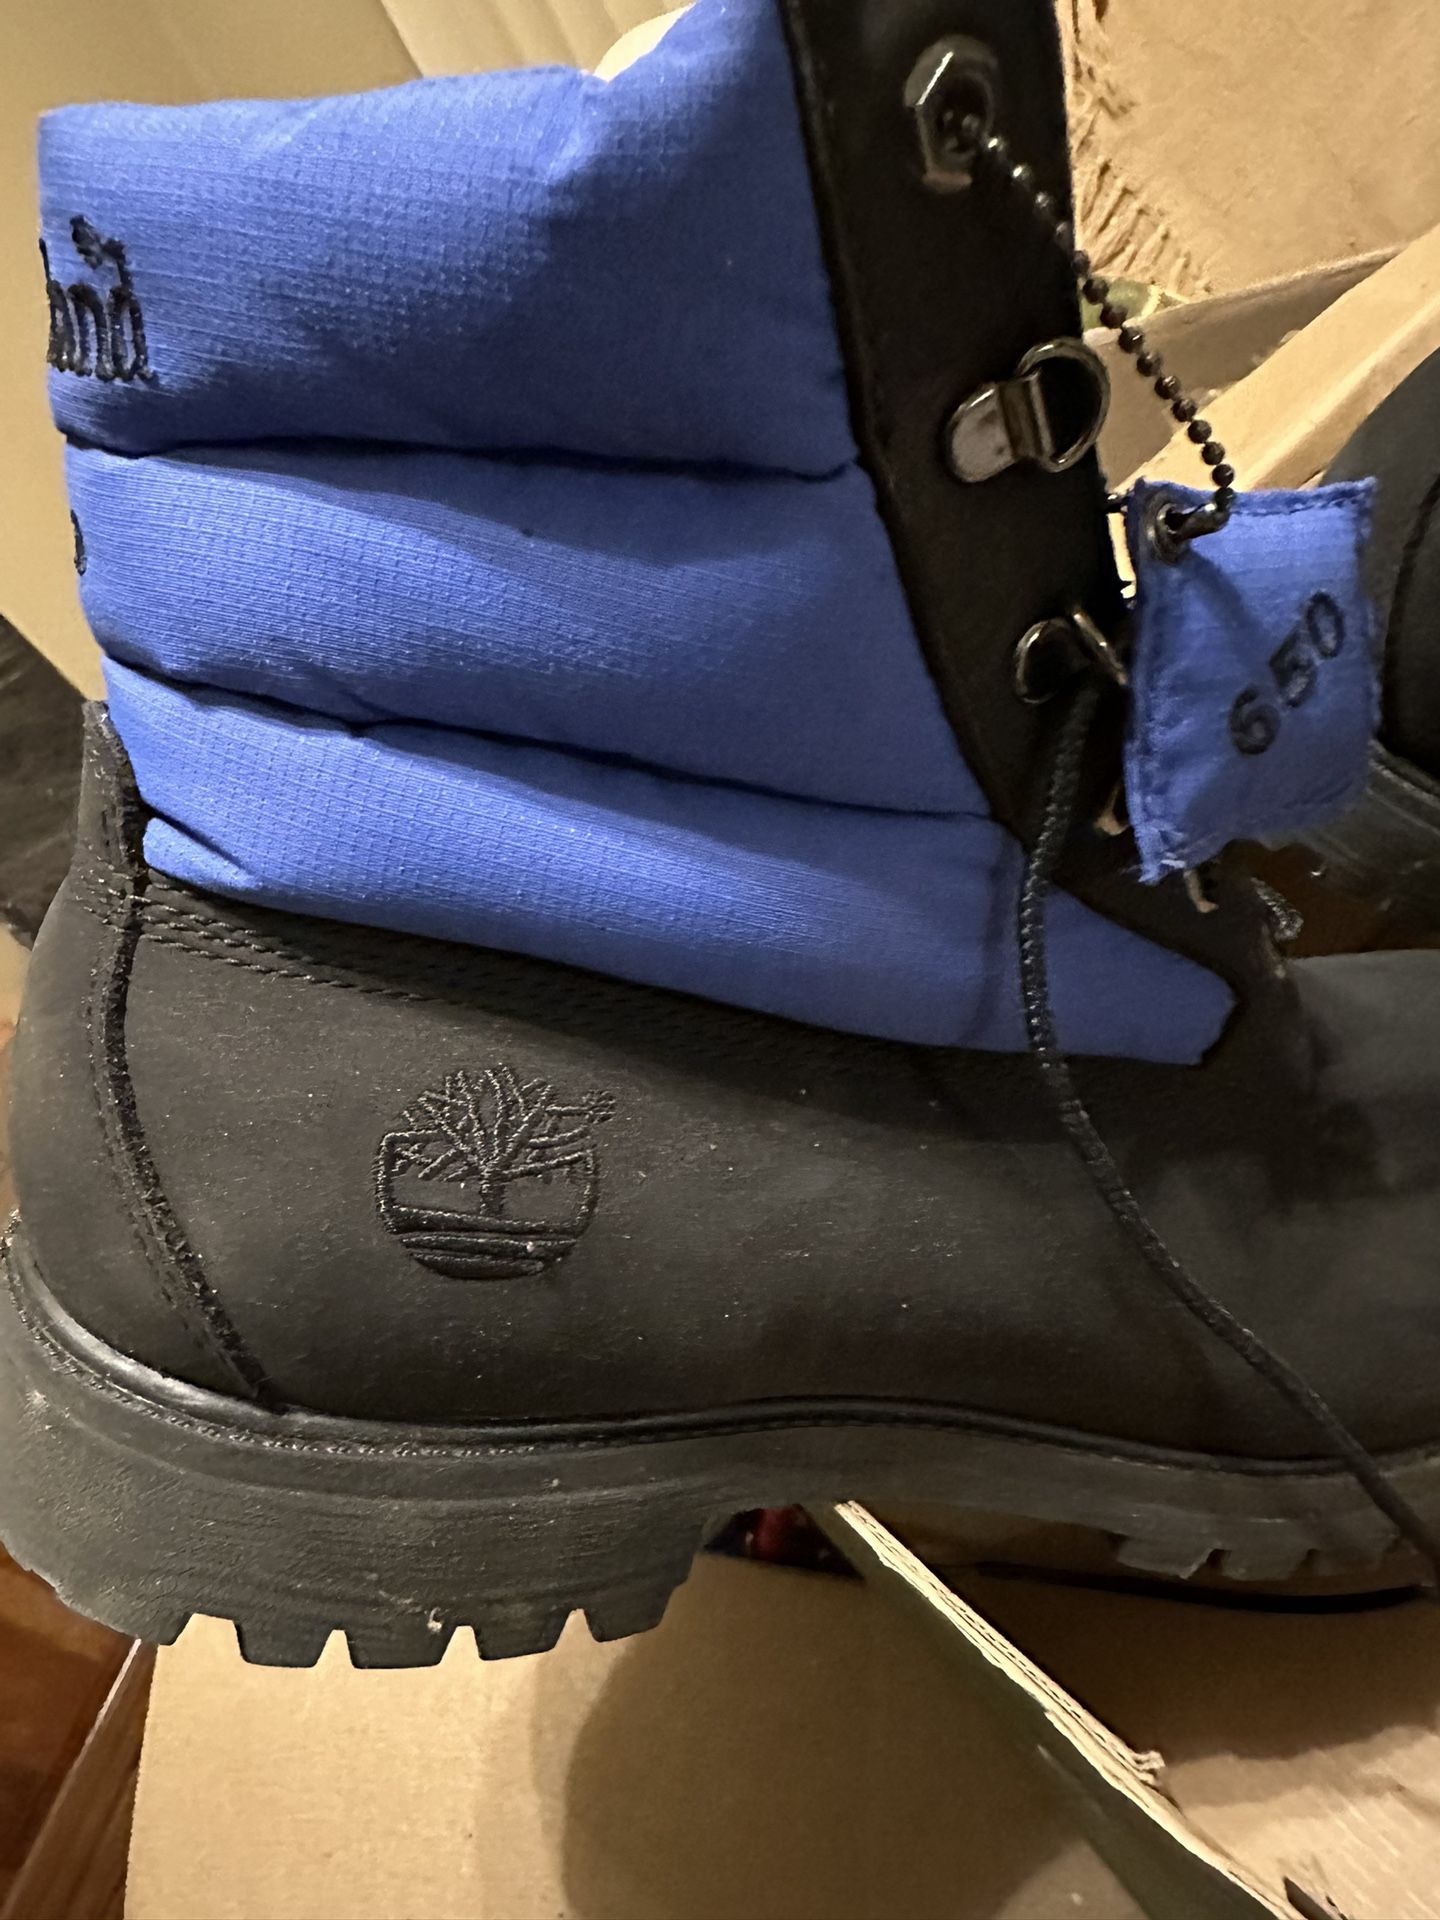 Timberland Snow Boots